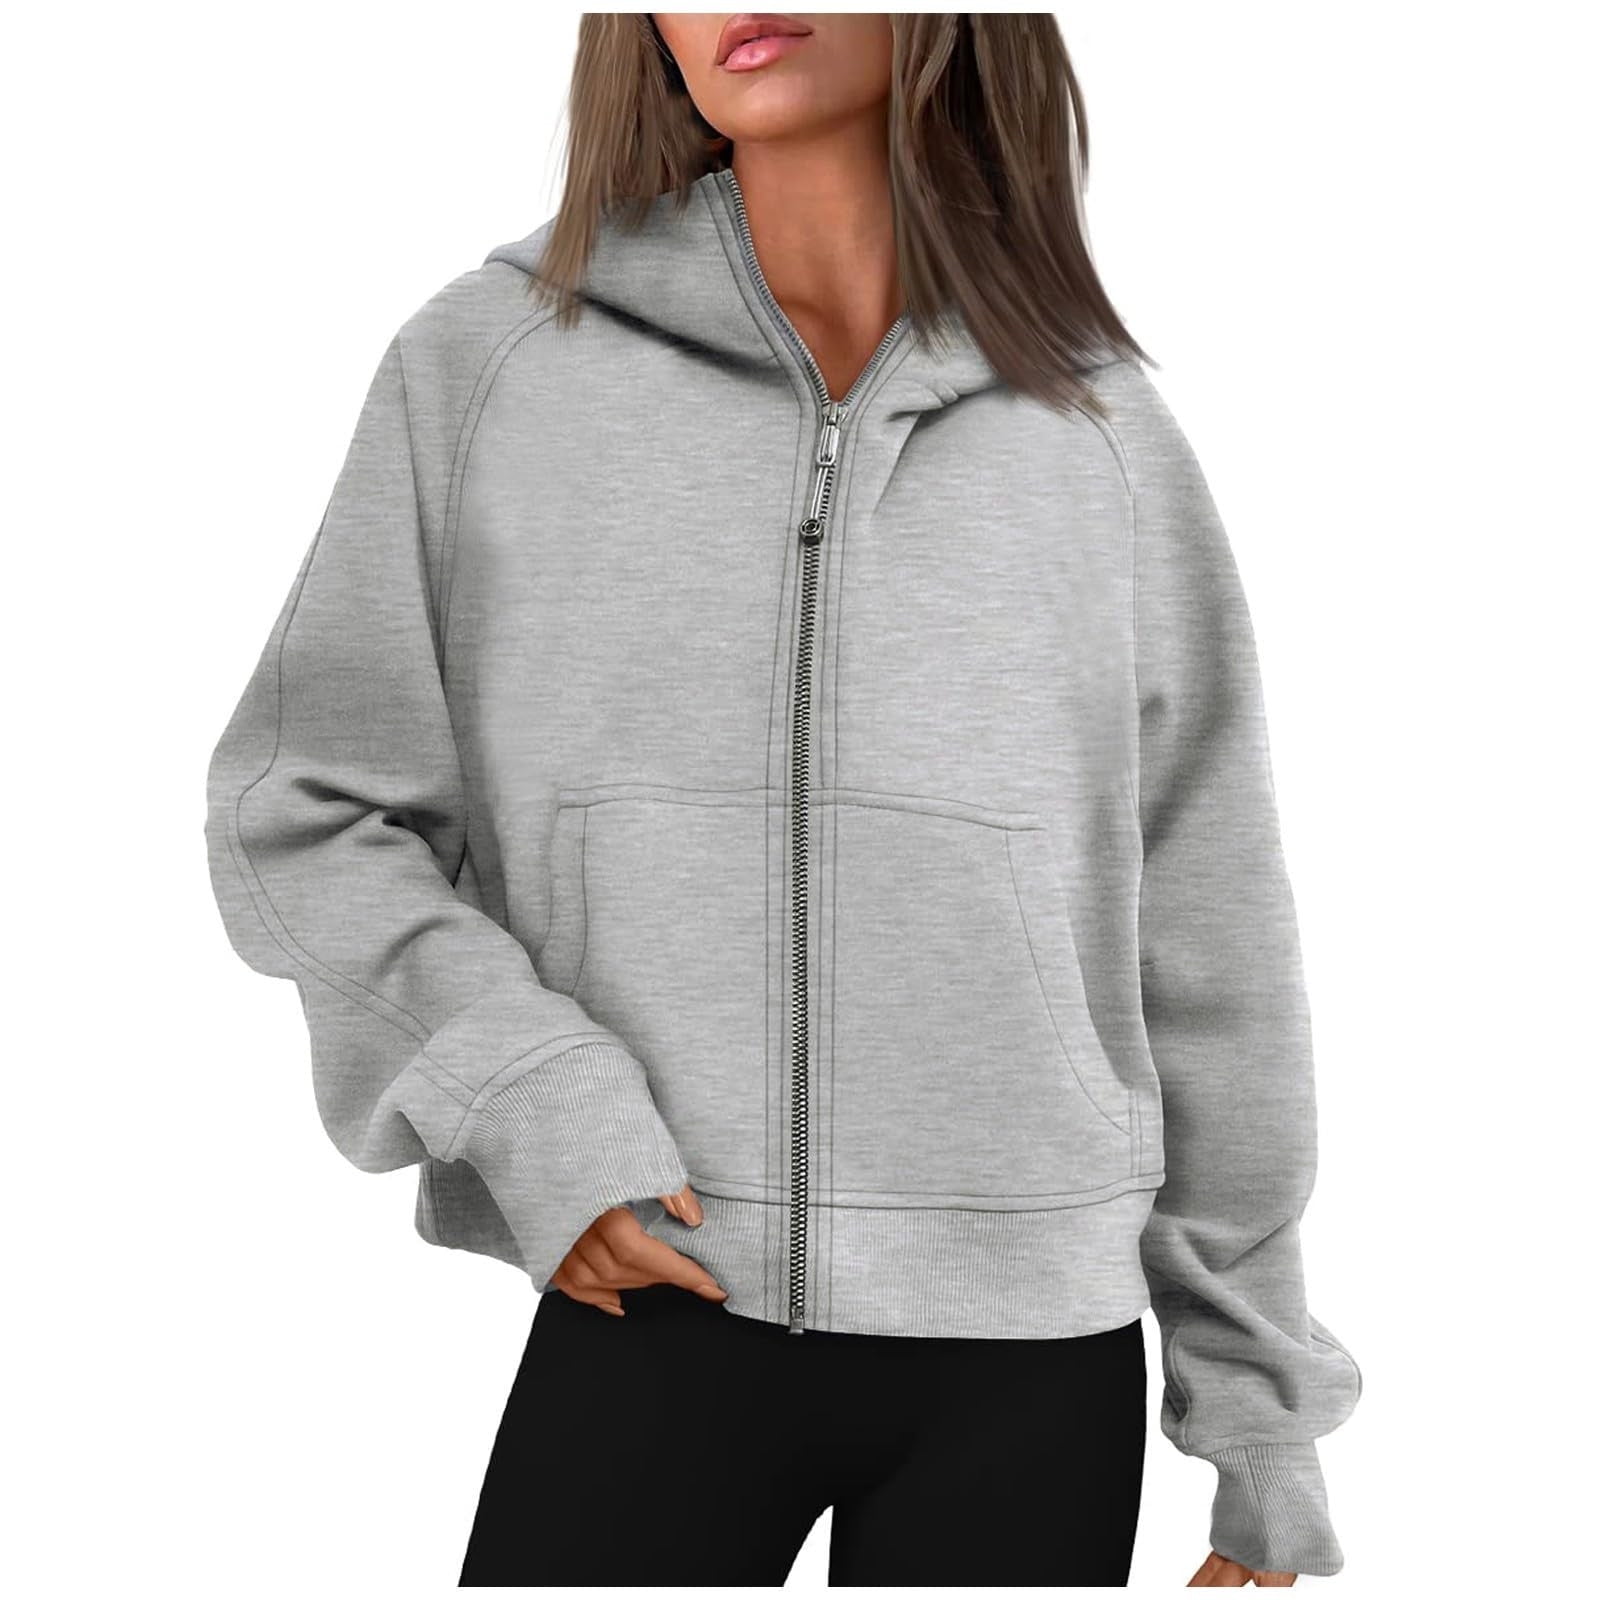 Balance Collection Long-Sleeve Women's Hoodie, Size XL — Family